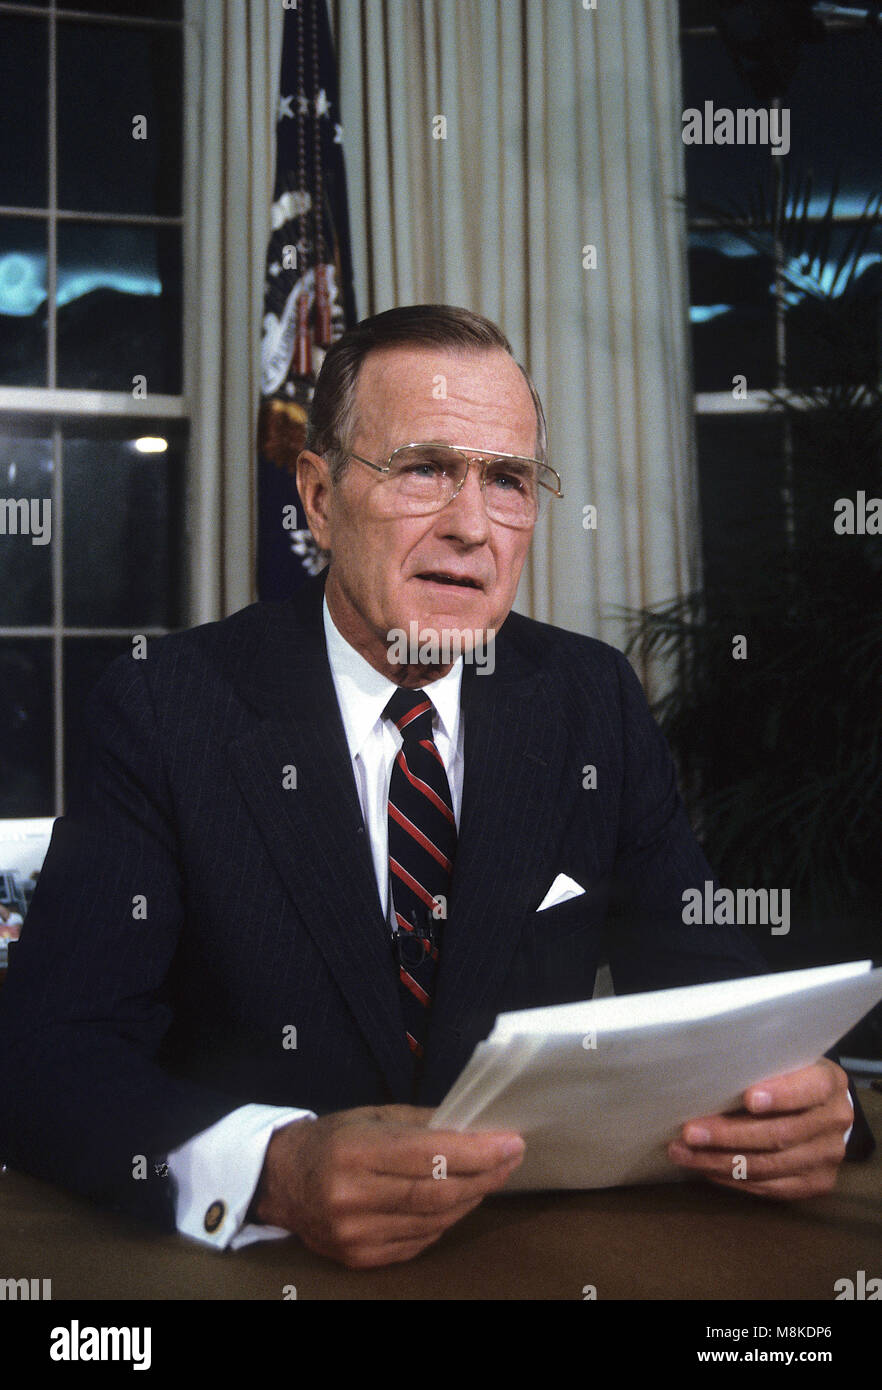 Washington DC., USA, September 27, 1991 President George  H.W. Bush gives televised speech from the Oval Office on Nuclear Arms Reduction. Bush announced a raft of unilateral initiatives to limit and reduce the U.S. tactical nuclear weapons arsenal. (1) withdraw to the United States all ground-launched short-range weapons deployed overseas and destroy them along with existing U.S. Stockpiles of the same weapons: and (2) cease deployment of tactical nuclear weapons on surface ships, attack submarines, and land-based naval aircraft during 'normal circumstances'. Implicitly, the United States res Stock Photo